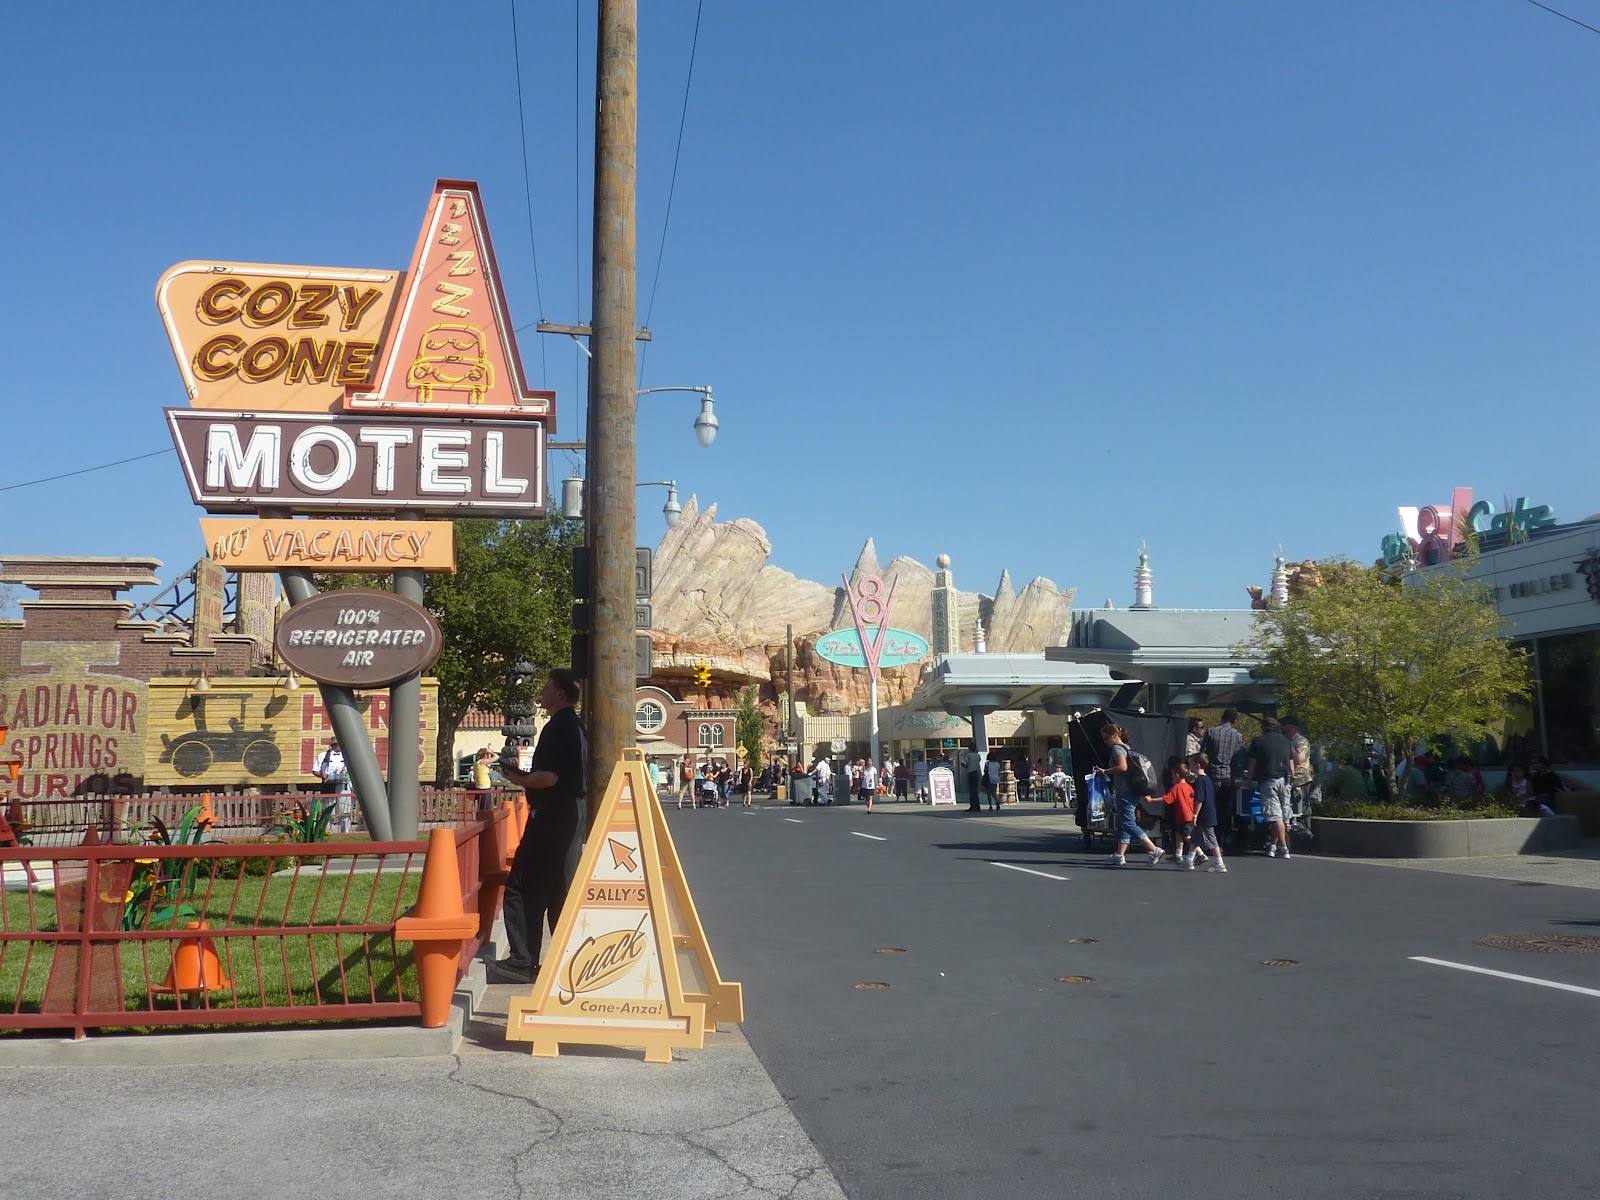 laura's miscellaneous musings: cars land preview: around radiator